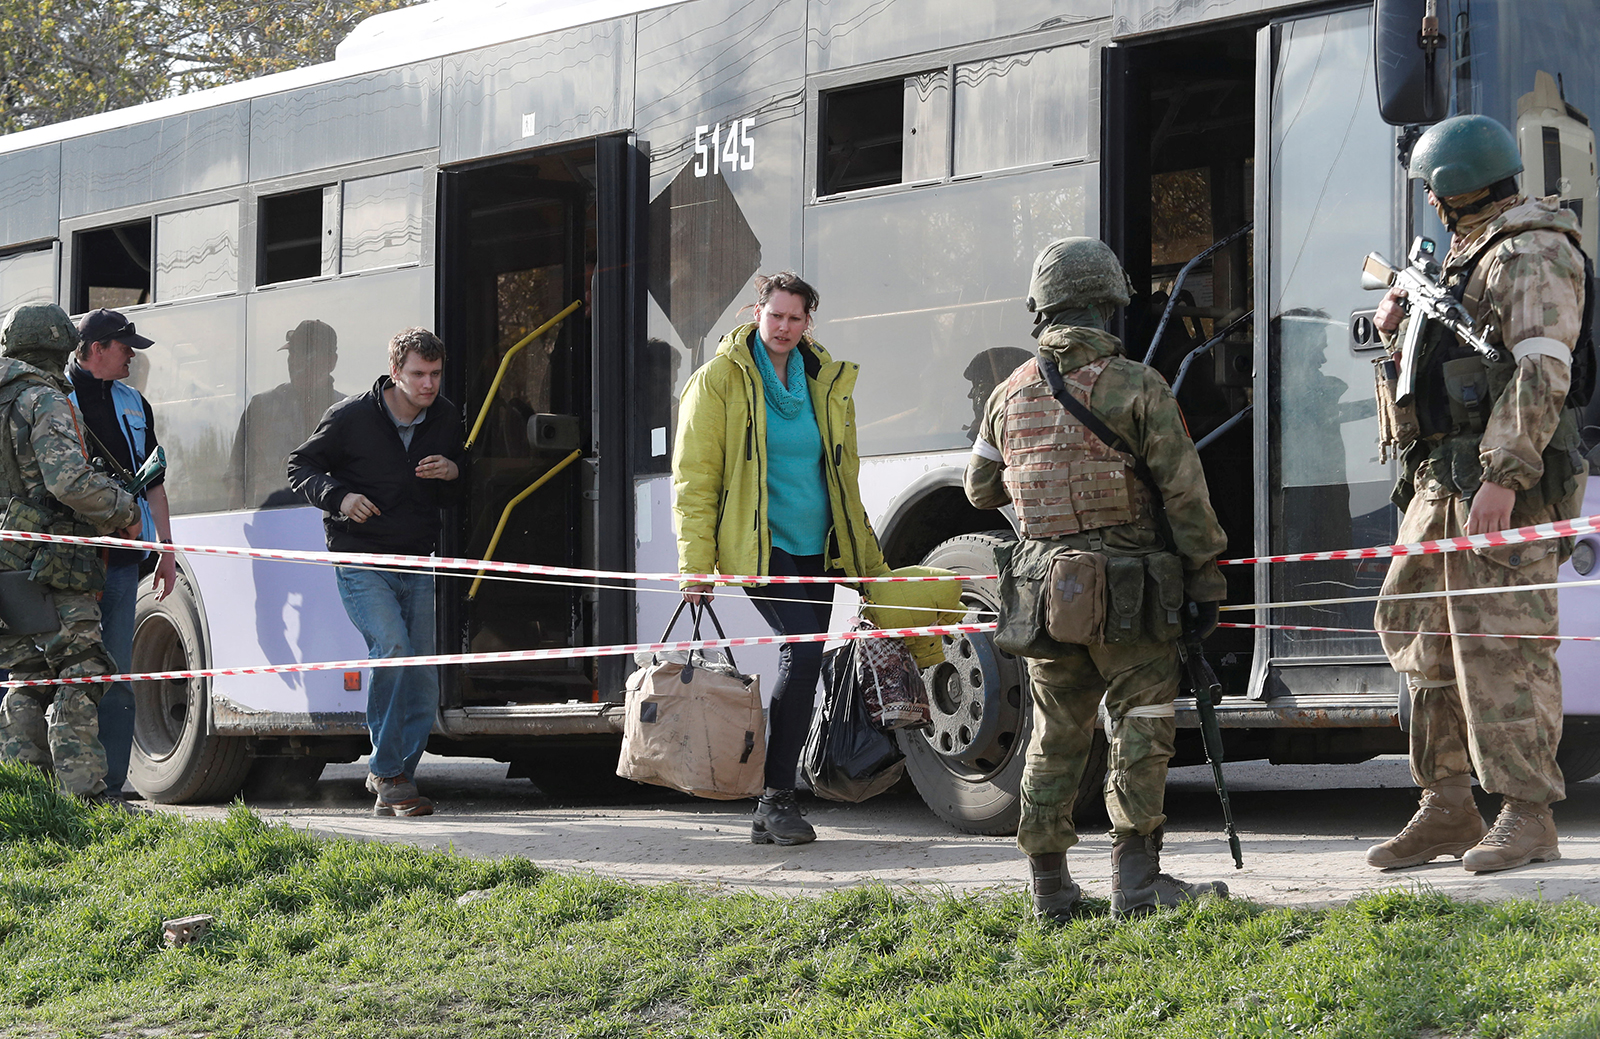 Azovstal steel plant employee Natalia Usmanova, 37, who was evacuated from Mariupol, arrives at a temporary accommodation center during Ukraine-Russia conflict in the village of Bezimenne in the Donetsk Region, Ukraine on May 1.